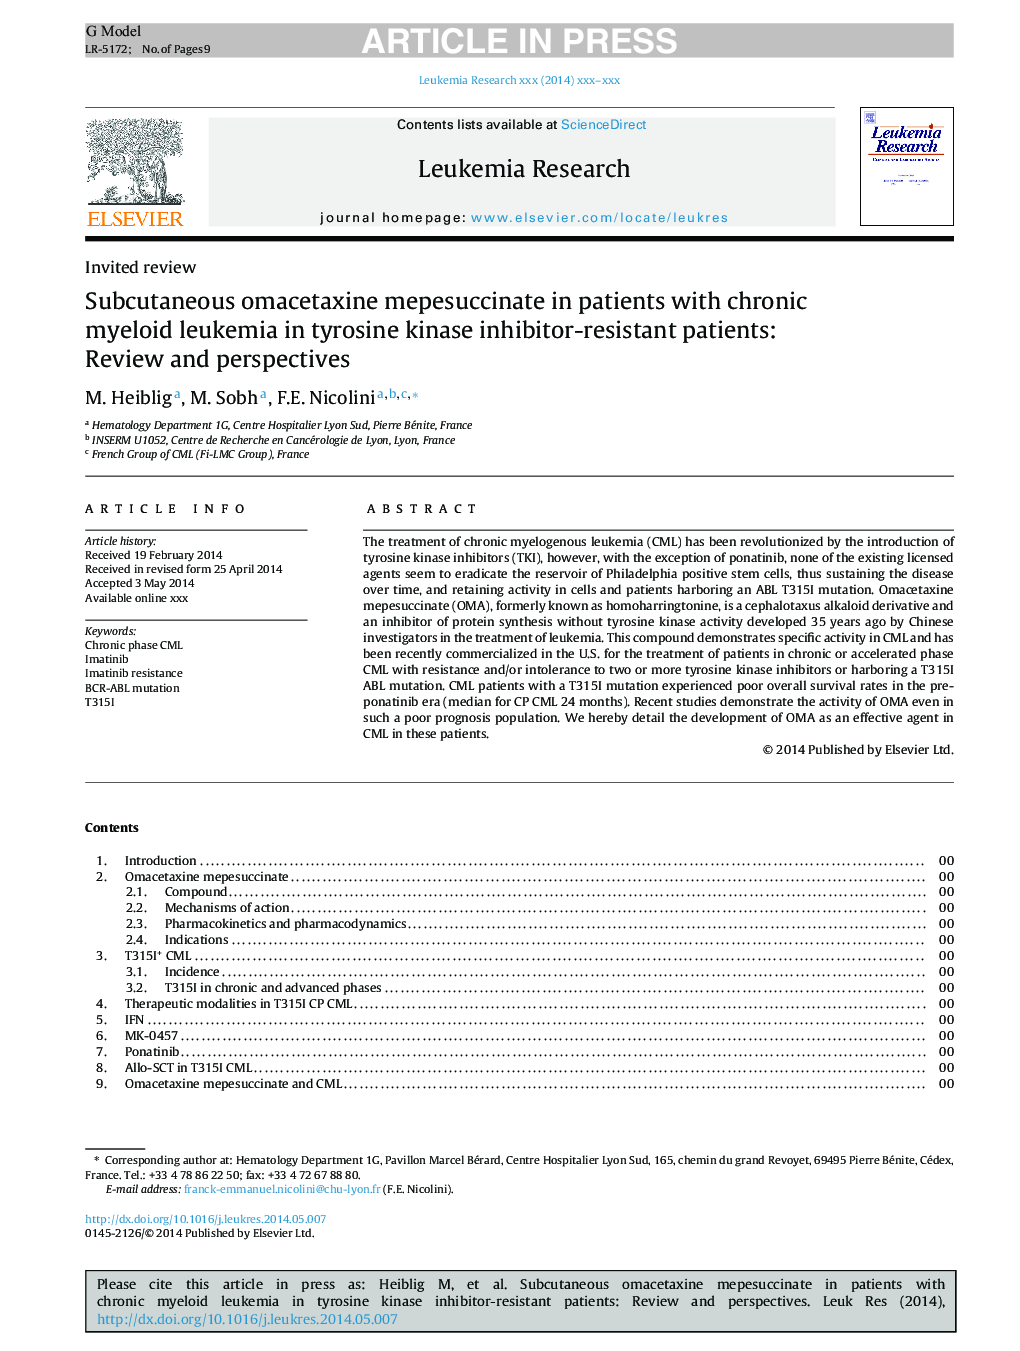 Subcutaneous omacetaxine mepesuccinate in patients with chronic myeloid leukemia in tyrosine kinase inhibitor-resistant patients: Review and perspectives